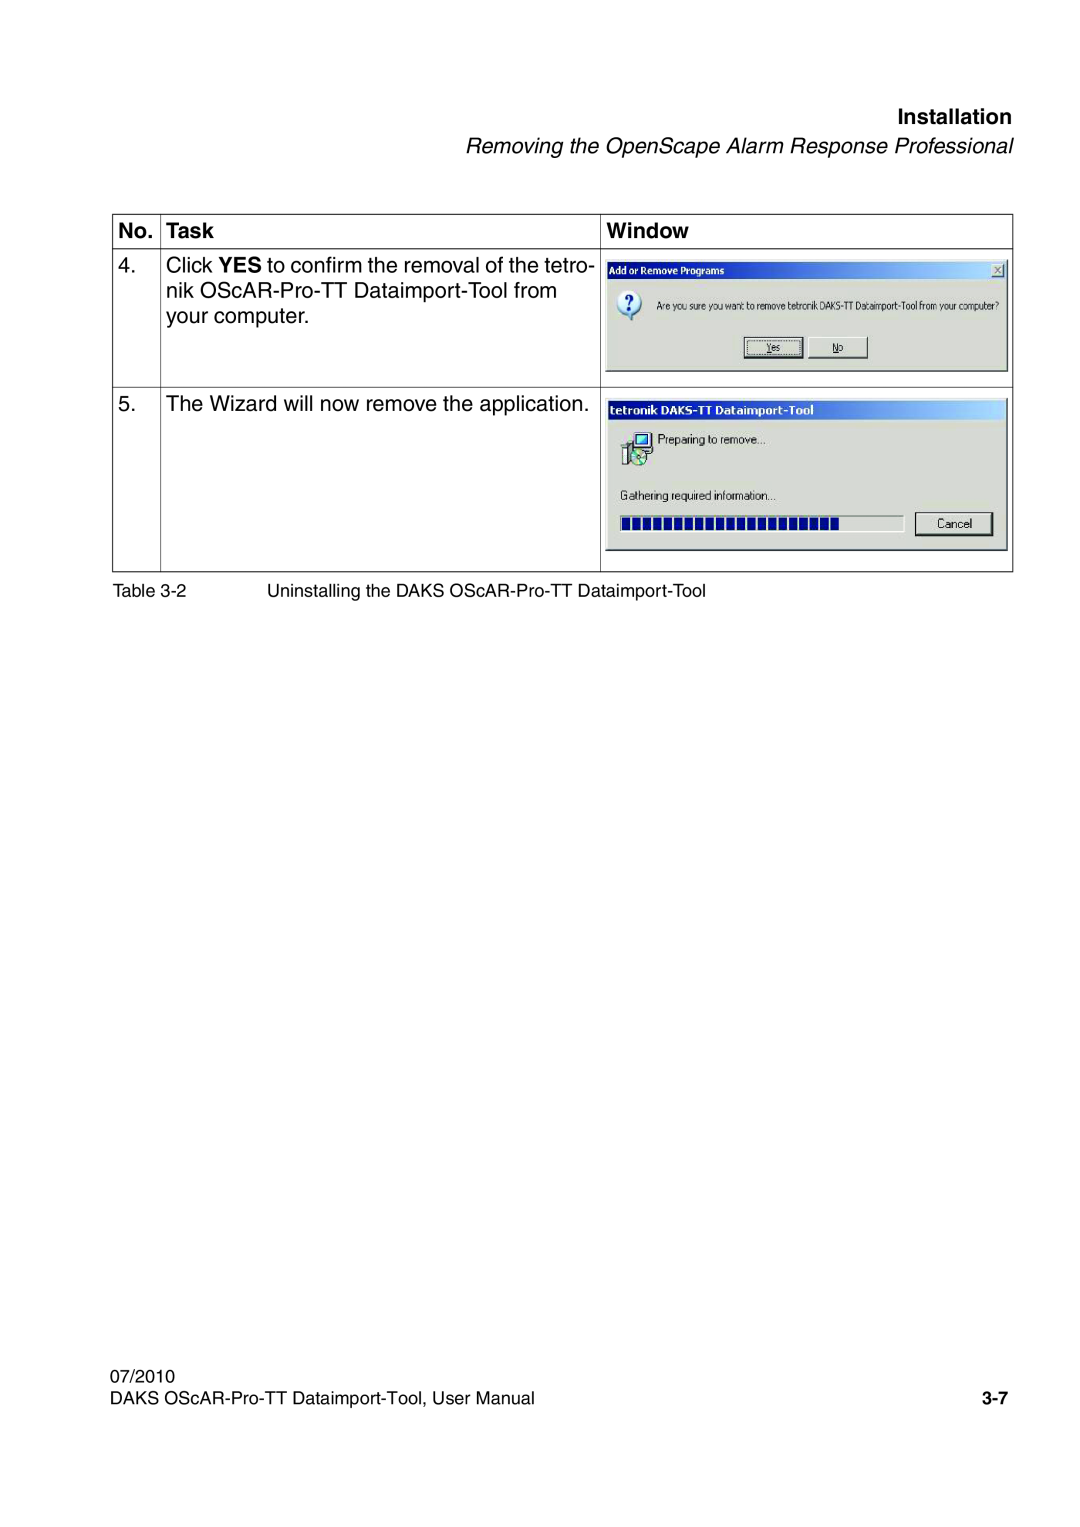 Siemens A31003-S1730-U102-1-7619 user manual Installation, No. Task, The Wizard will now remove the application, Window 